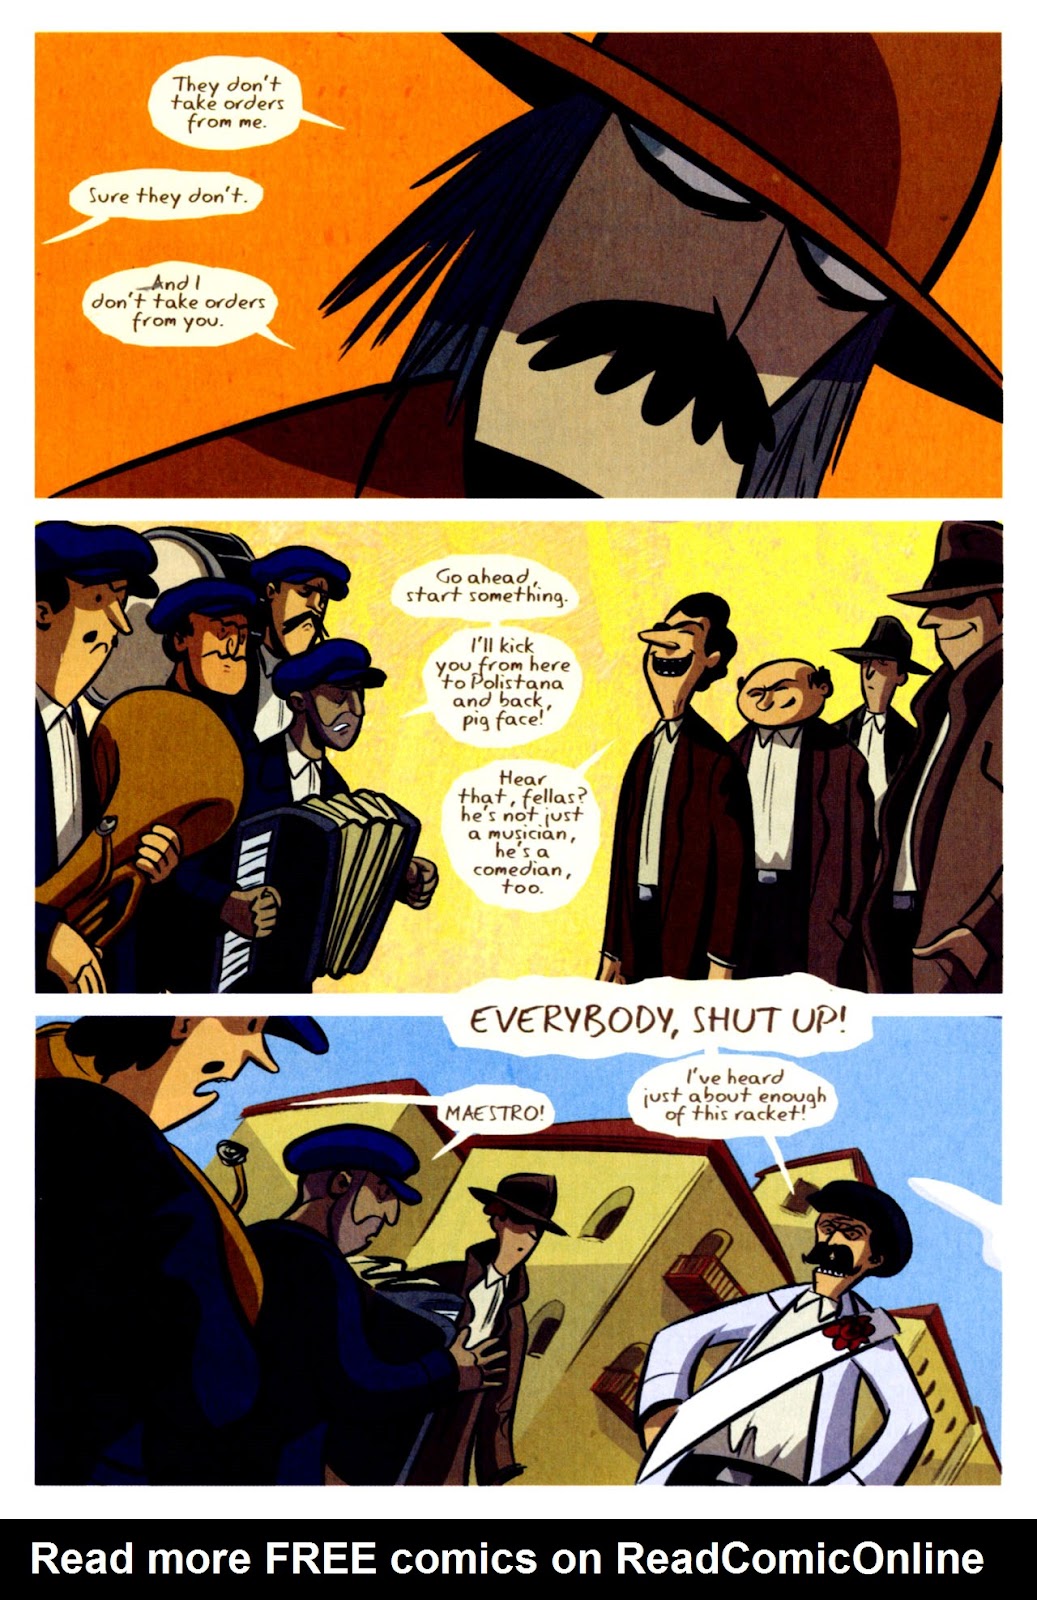 Parade (with fireworks) issue 1 - Page 15